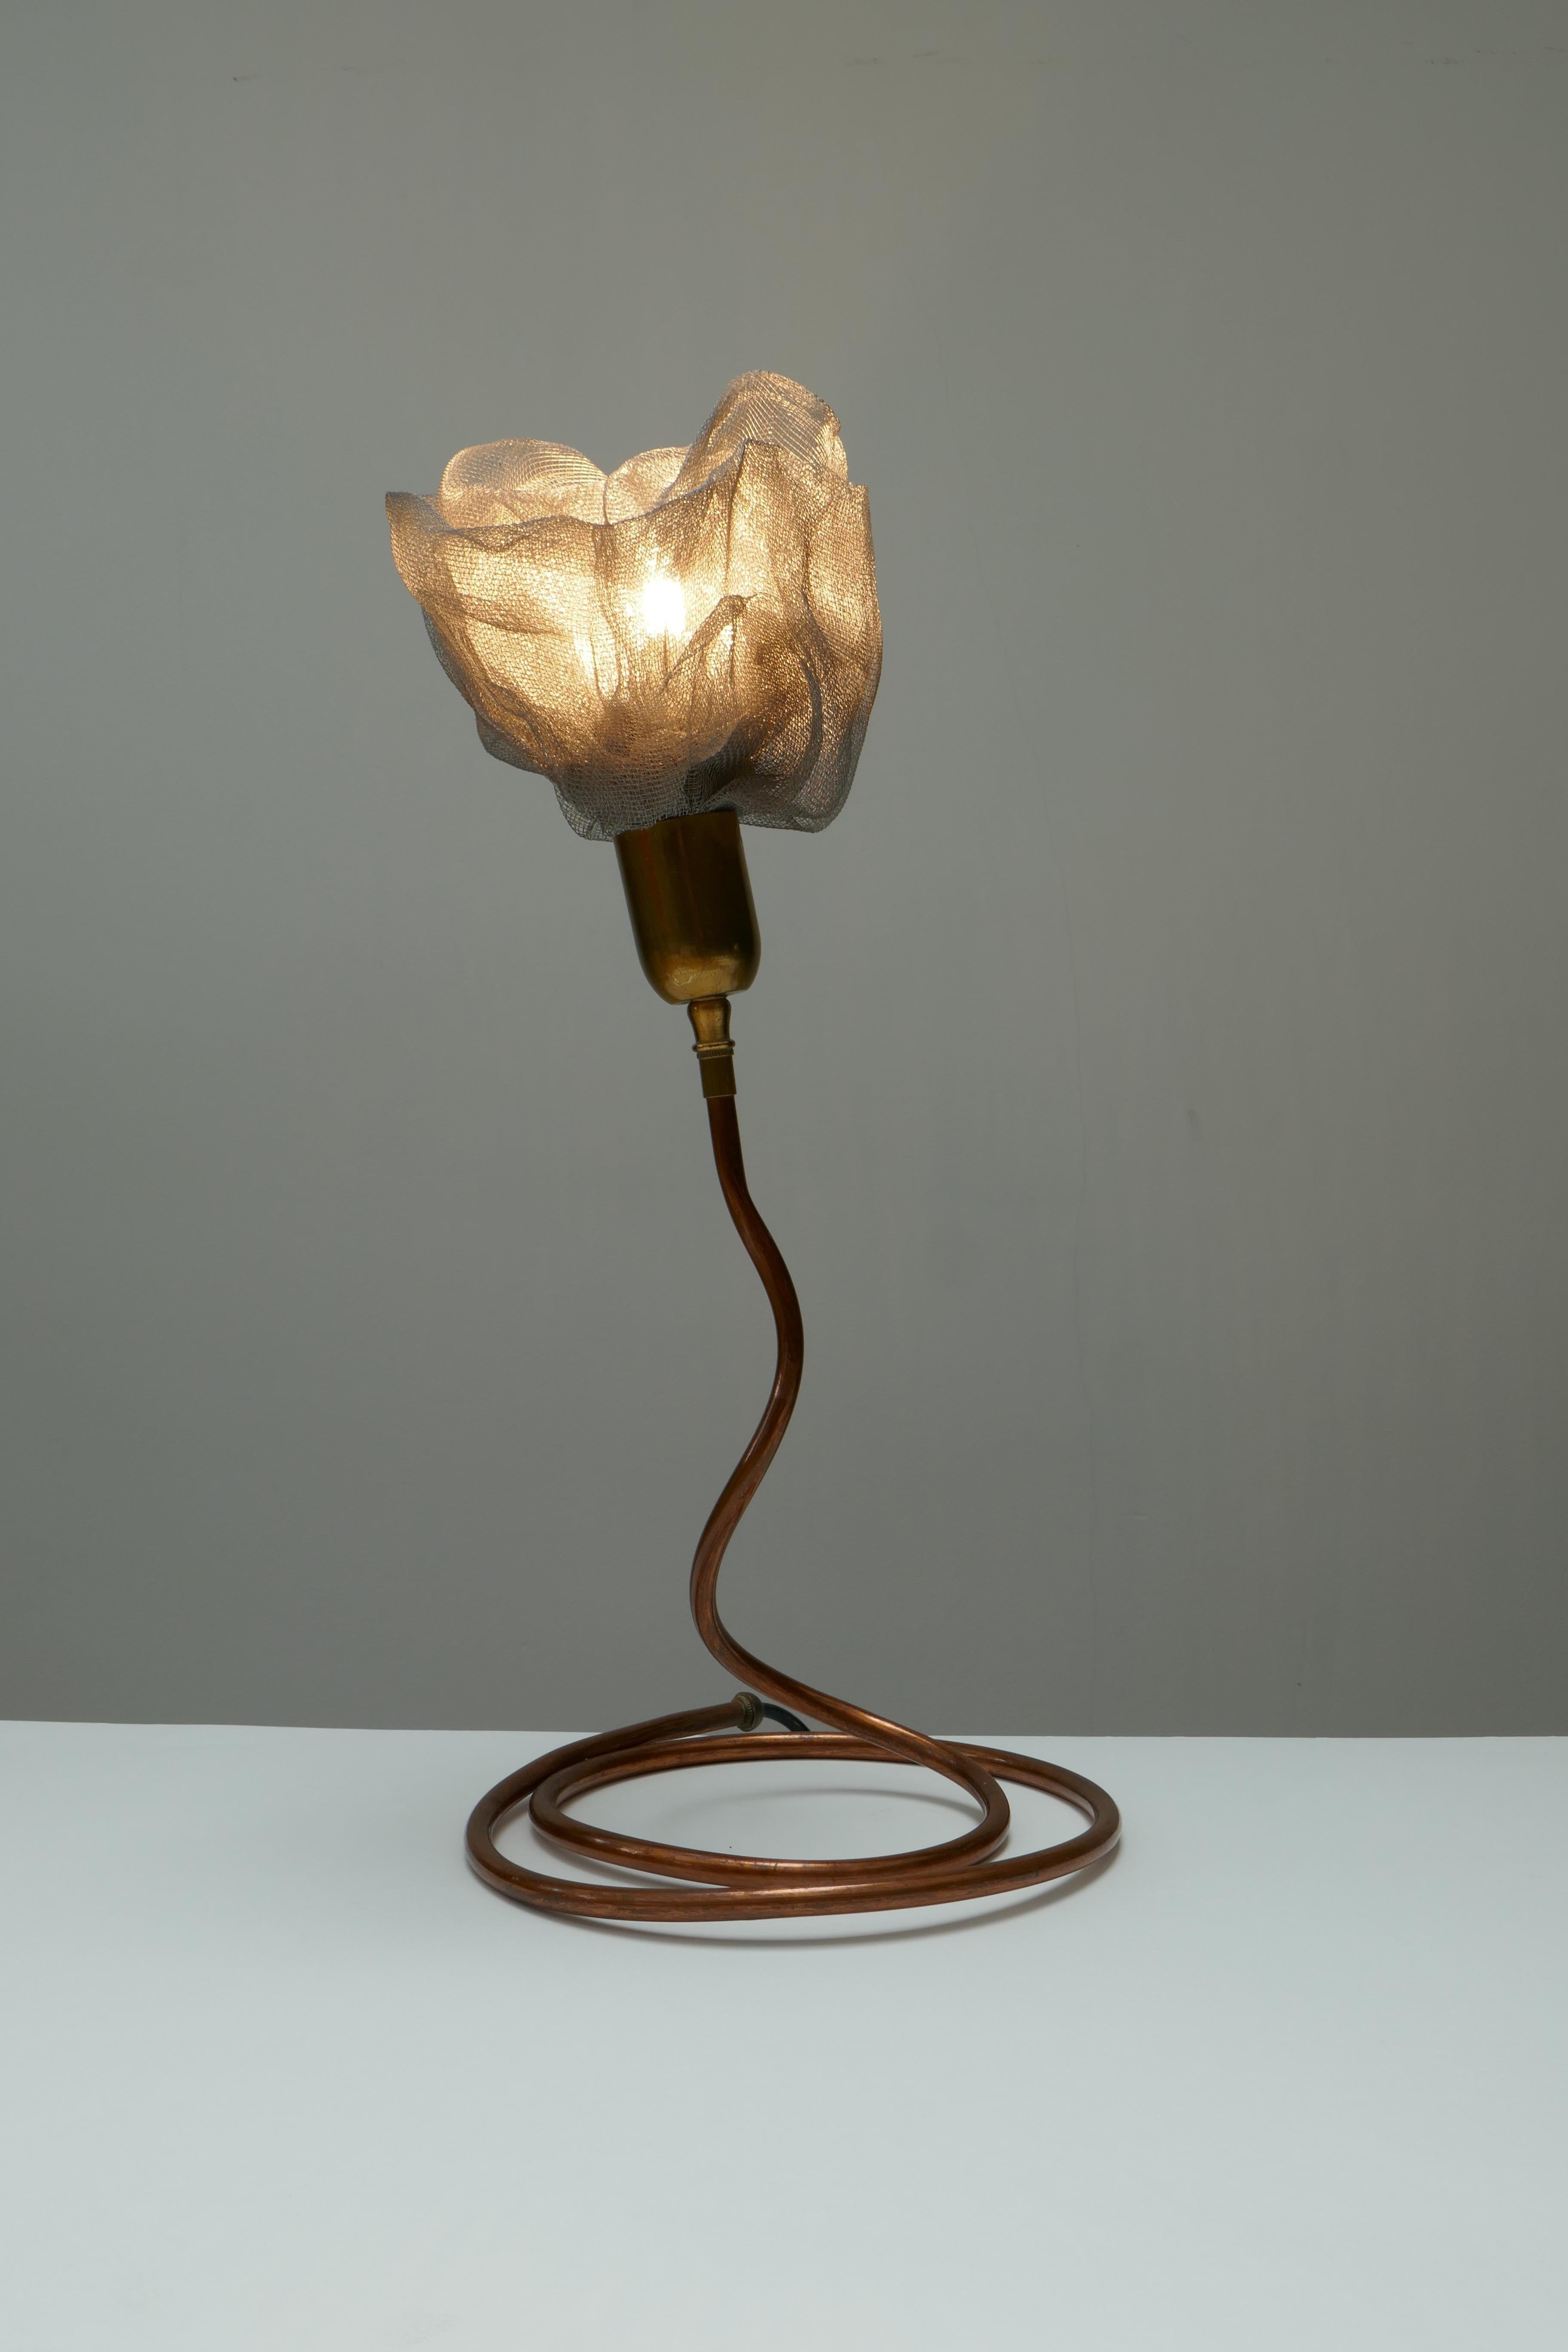 Metal Woven Mesh Flower Table Lamp with Brass & Copper Serpent Base, Italy 1970s For Sale 2